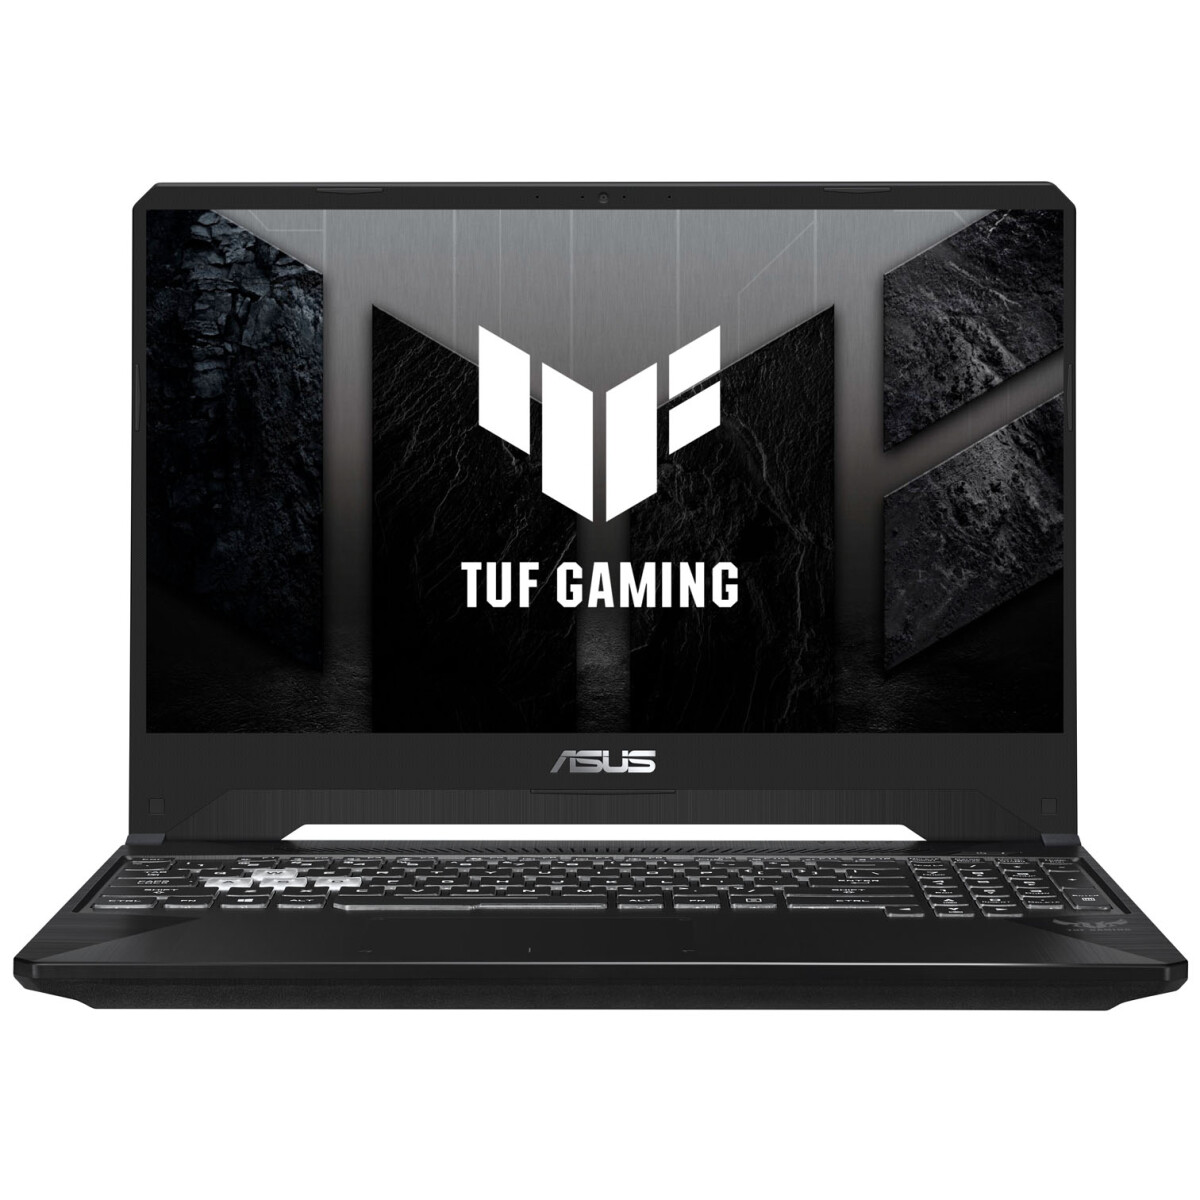 Notebook Gamer Asus Core I5 4.4GHZ, 8GB, 512GB Ssd, 15.6" Fhd, Rtx 3050 4GB - 001 